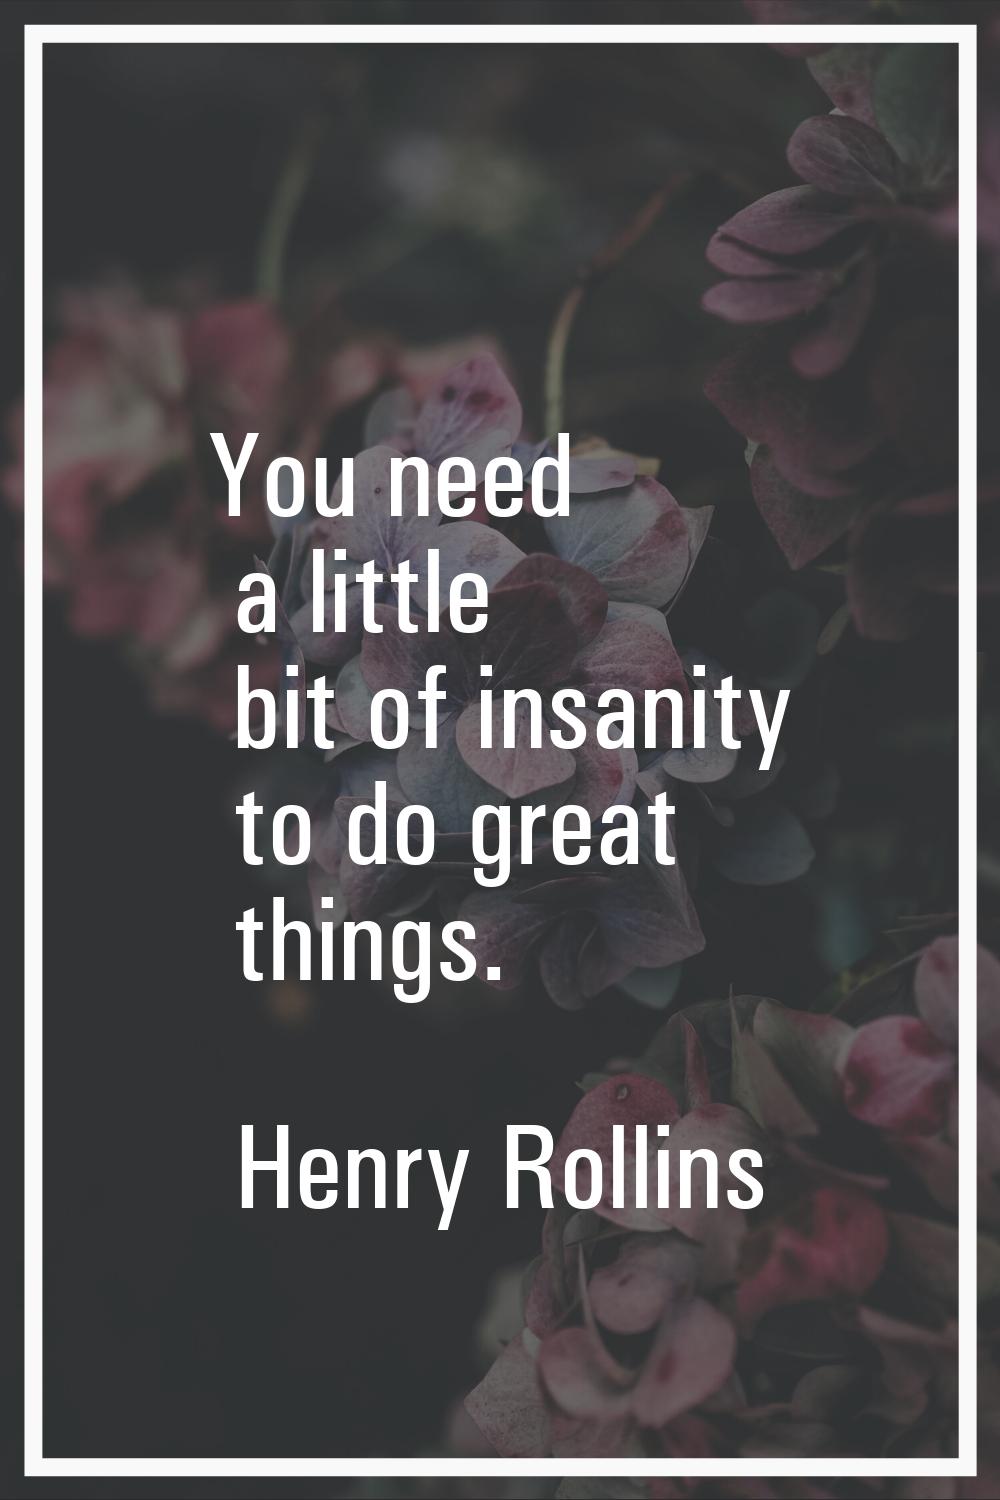 You need a little bit of insanity to do great things.